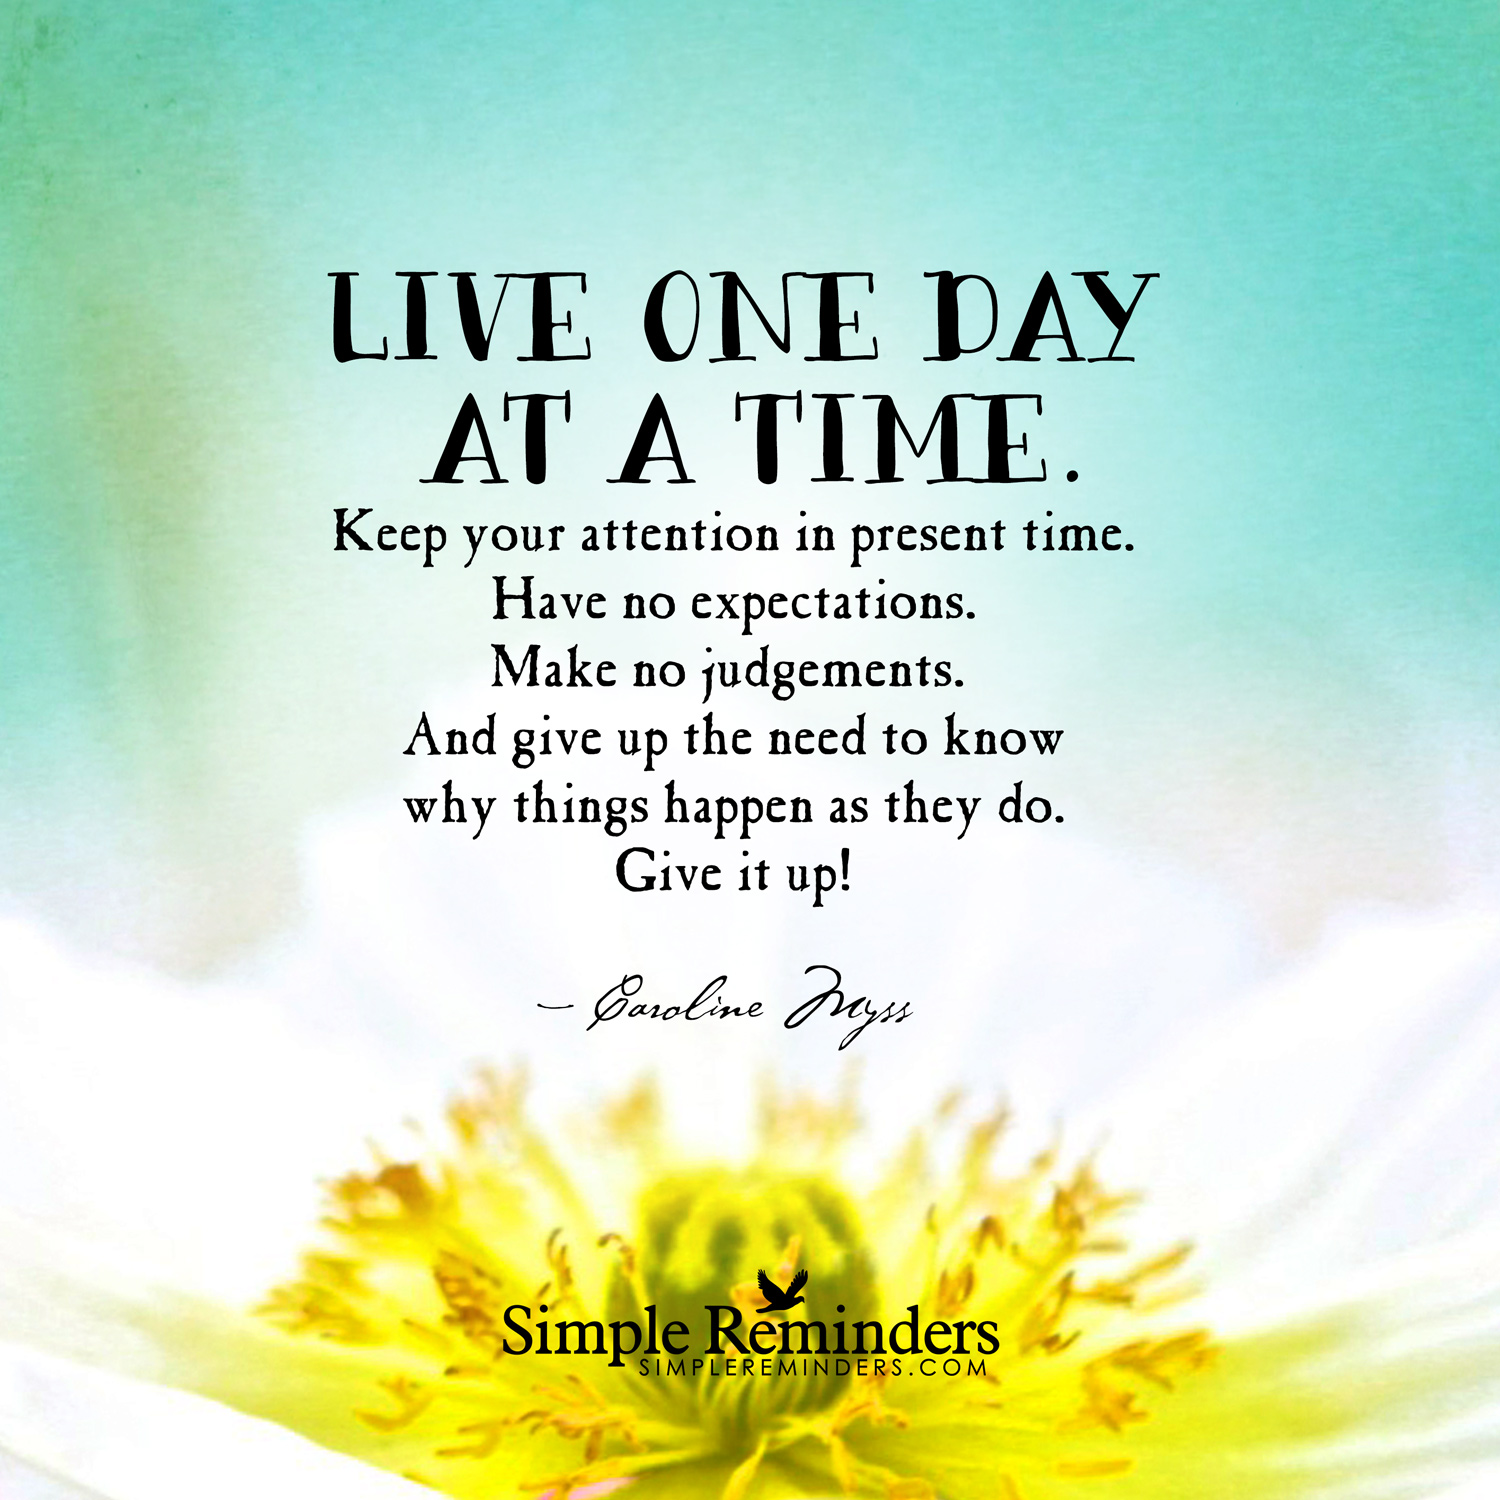 download one day at a time in al-anon pdf